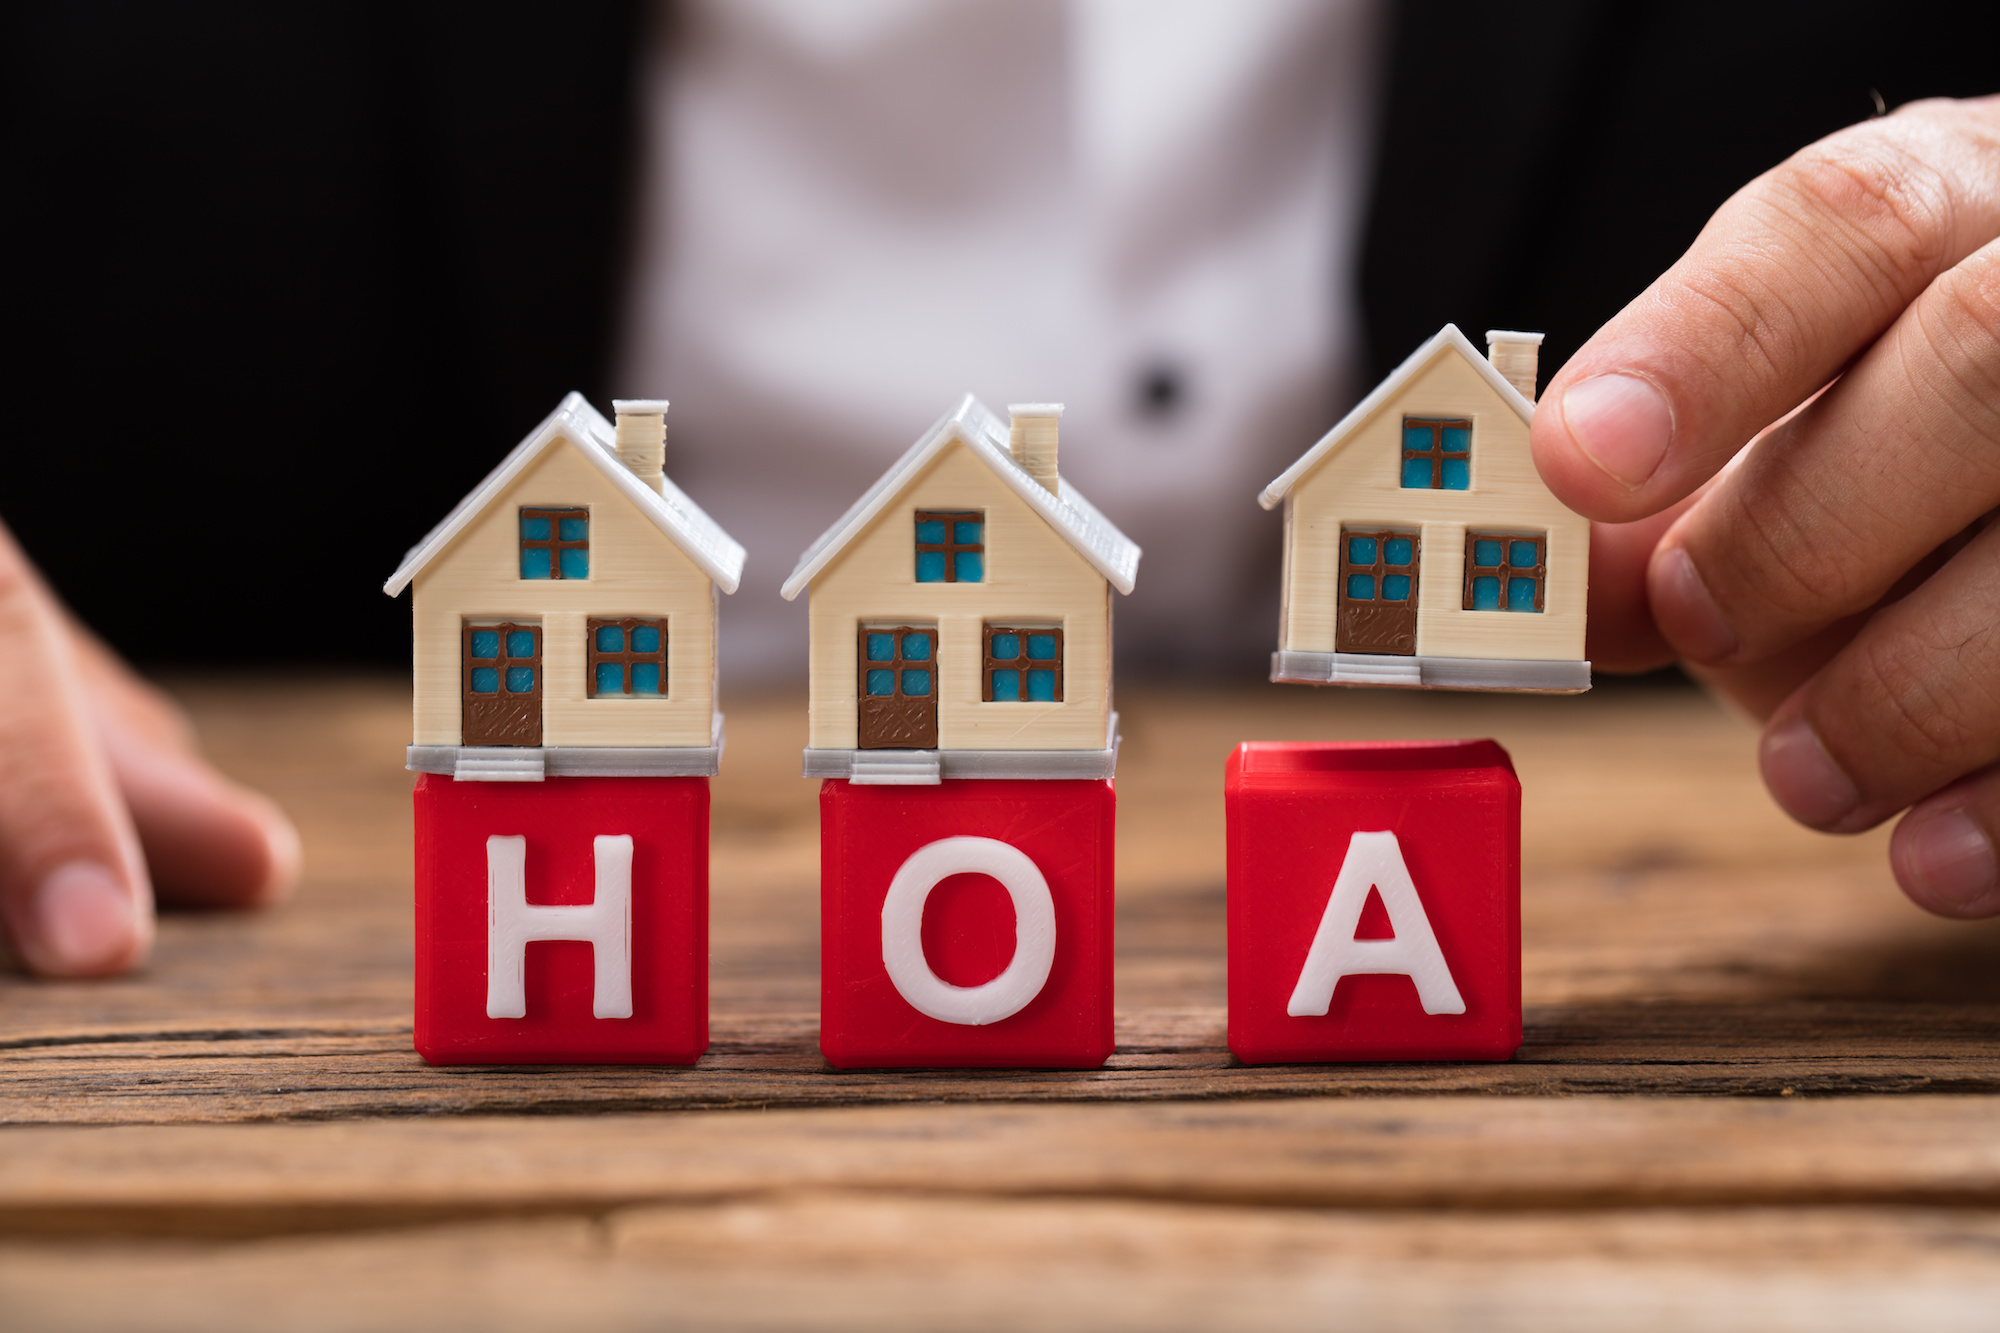 Miniature blocks spelling out "HOA" have small house figurines placed on top of them. 